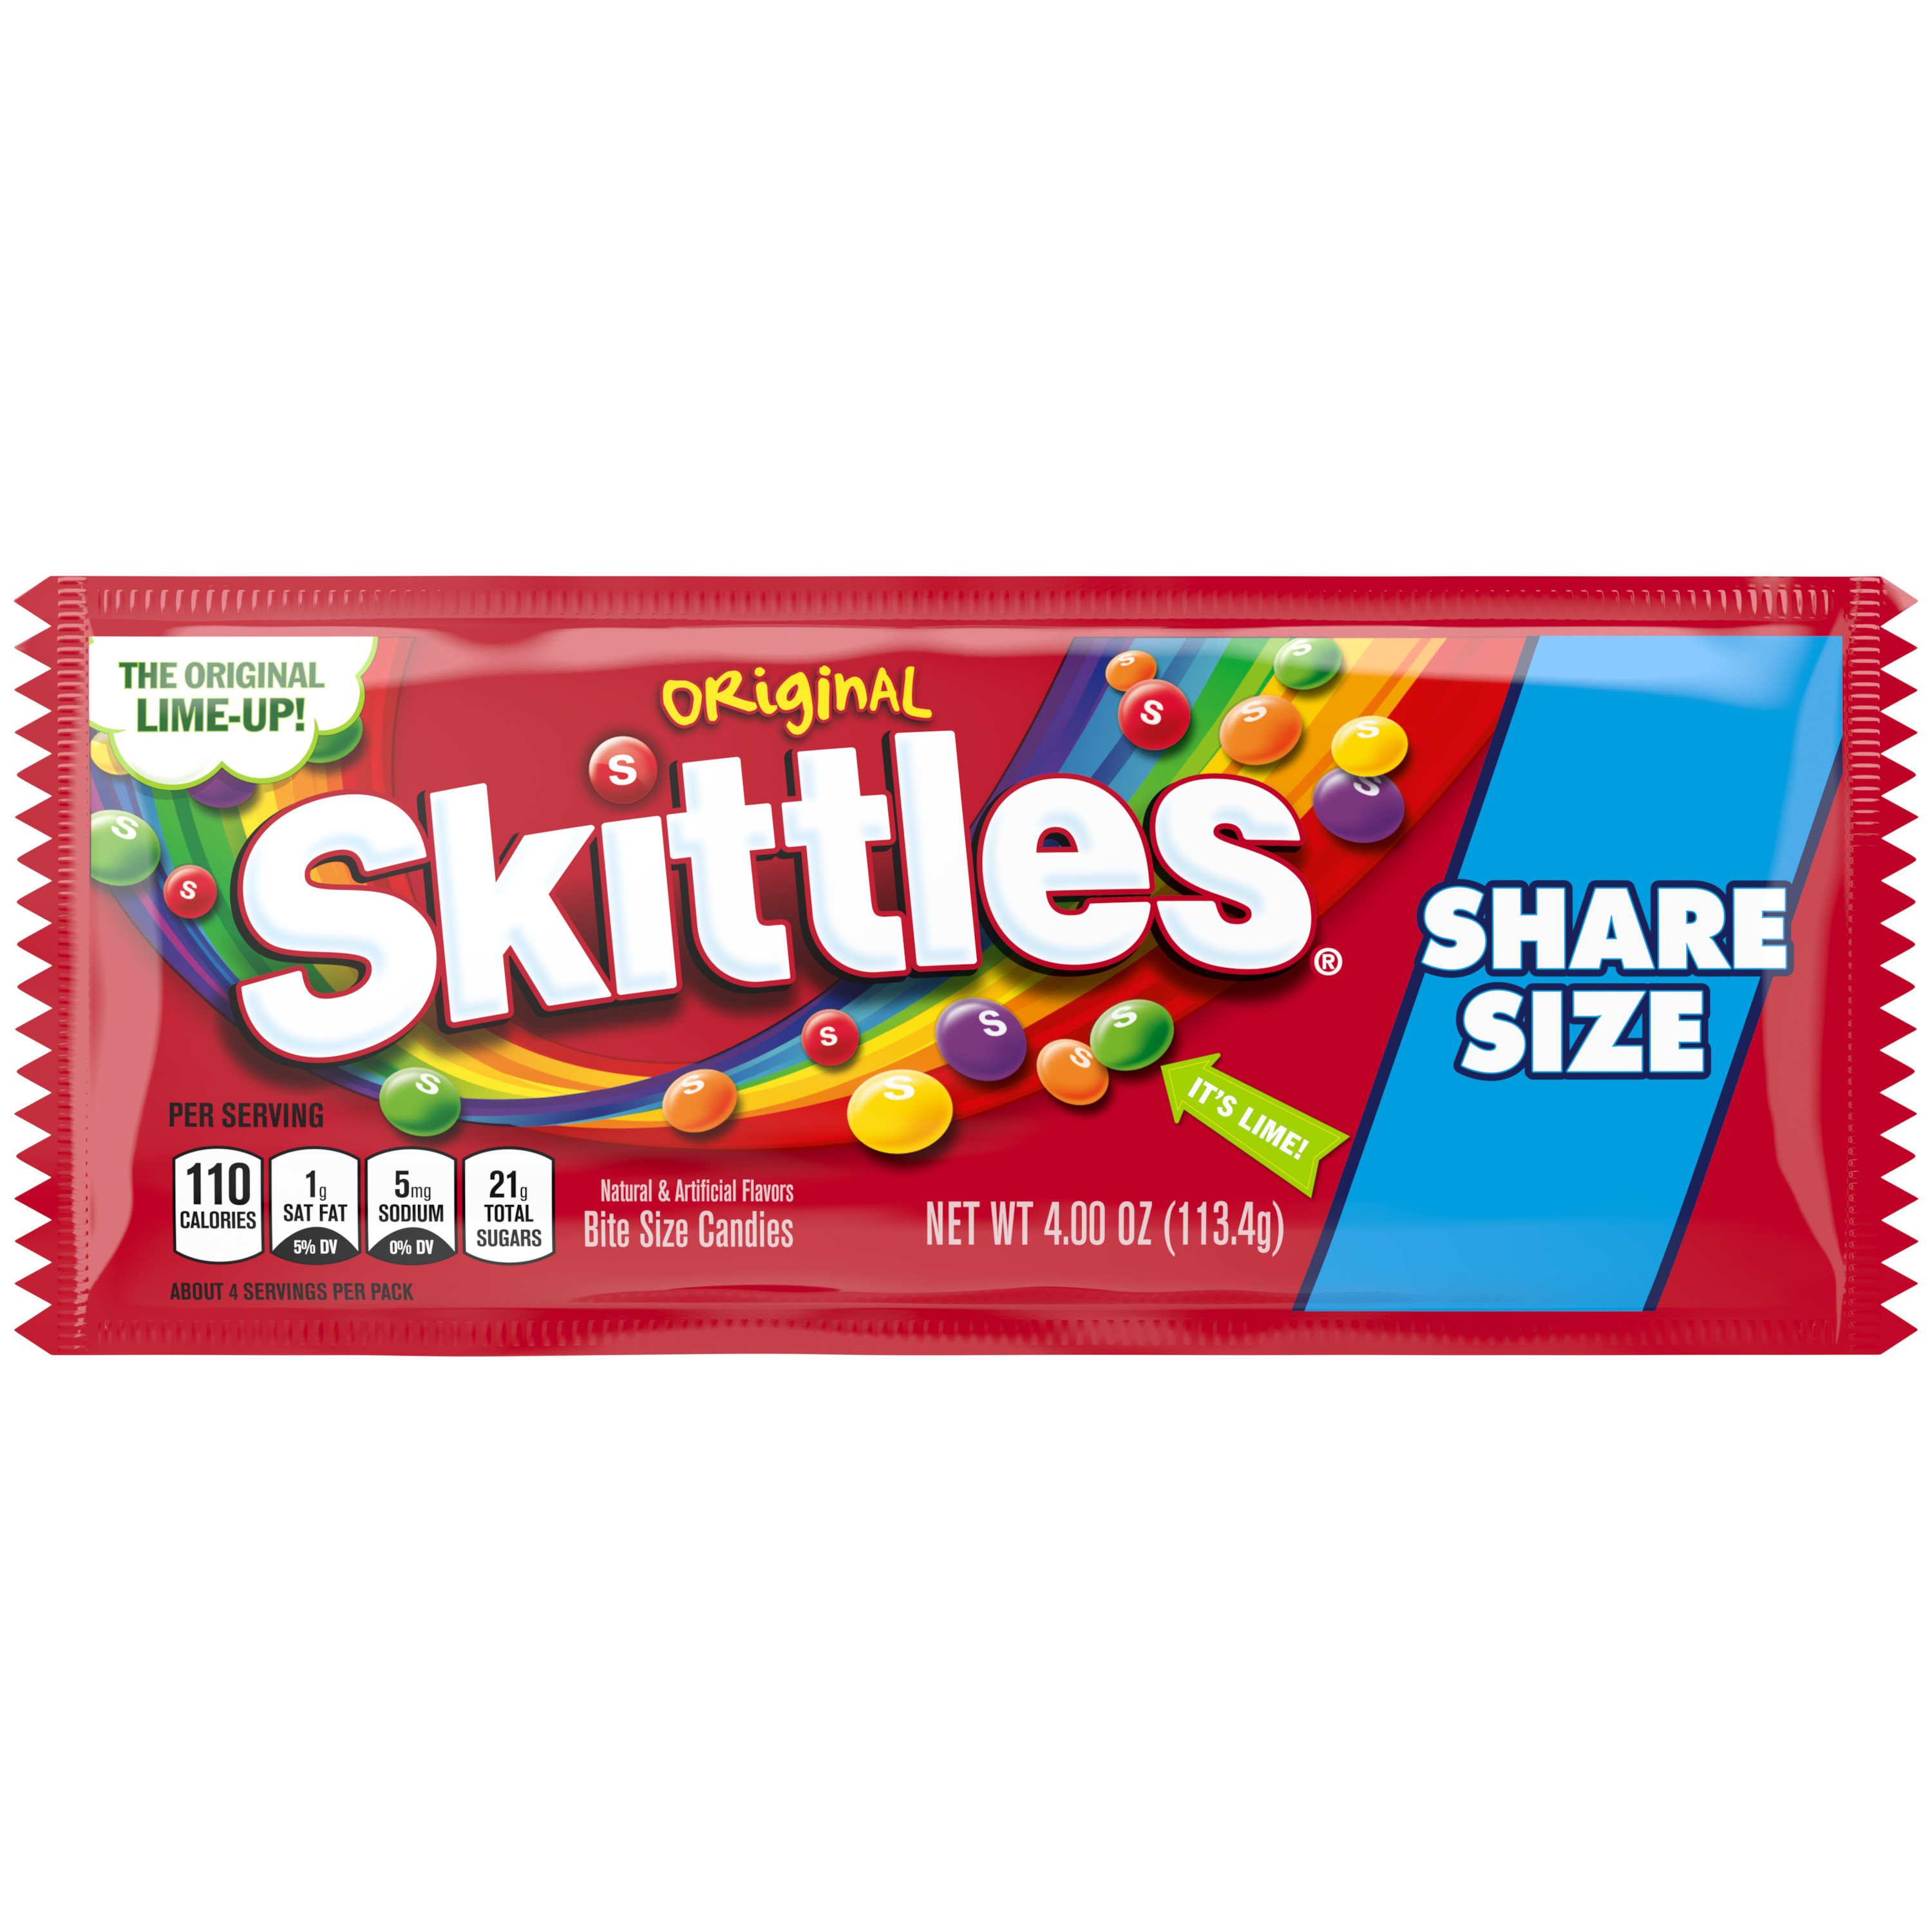 Skittles Original Chewy Candy, Share Size - 4 oz Bag - image 1 of 14